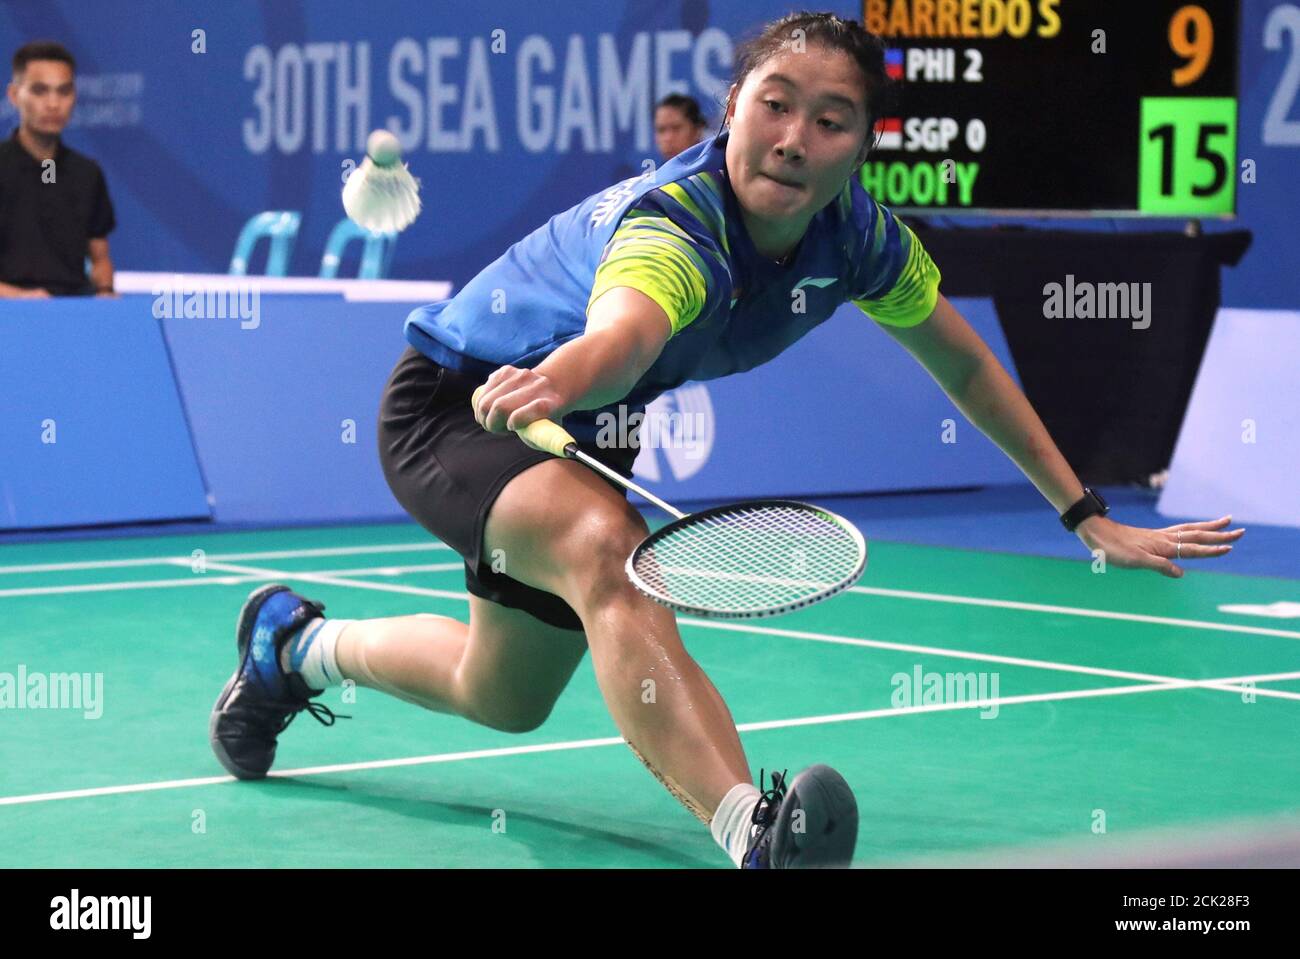 Southeast Asian Games - Badminton - Muntinlupa Sports Center, Muntinlupa,  Philippines - December 1, 2019 Singapore's Yue Yann Hooi Jaslyn in action  during her women's quarter final singles match against Philippines' Sarah